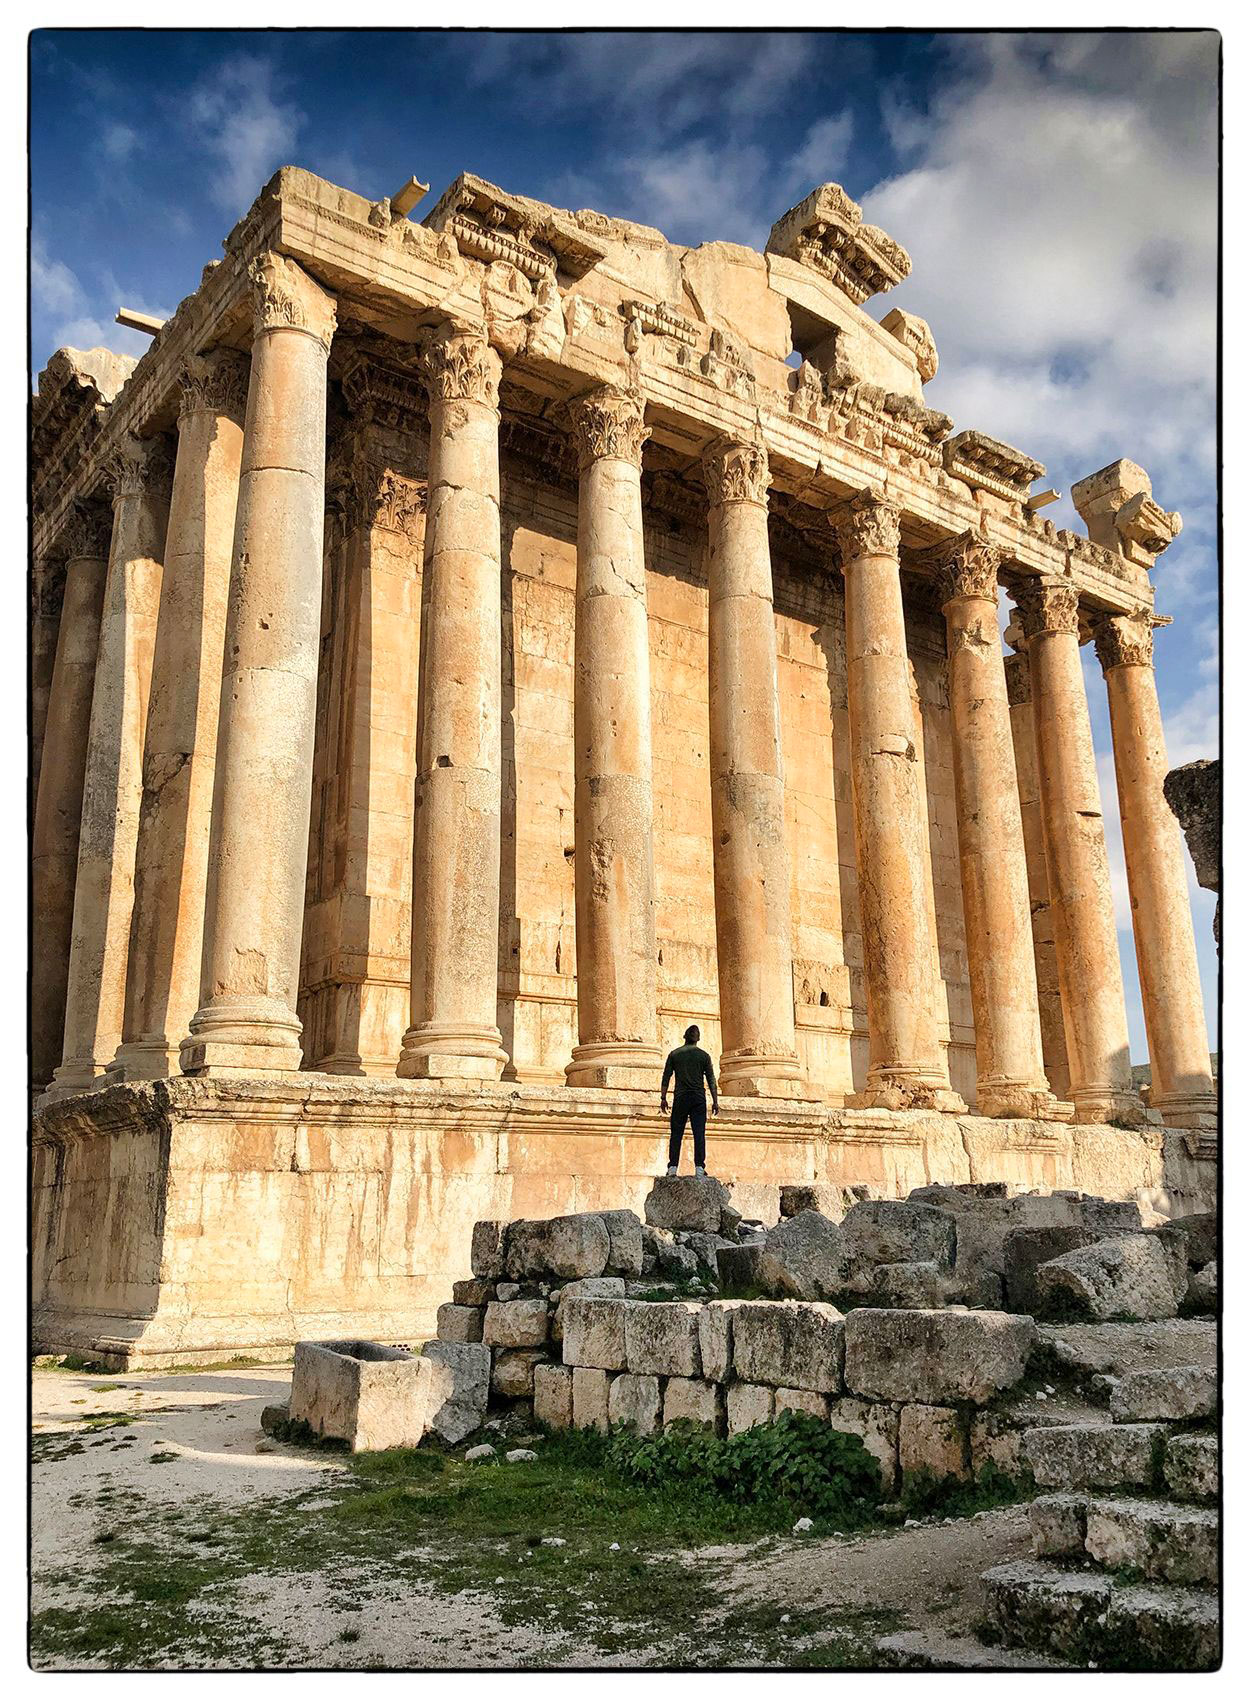 a-man-stands-on-ruins-and-is-silhouetted-against-a-temple-at-baalbek-in-lebanon